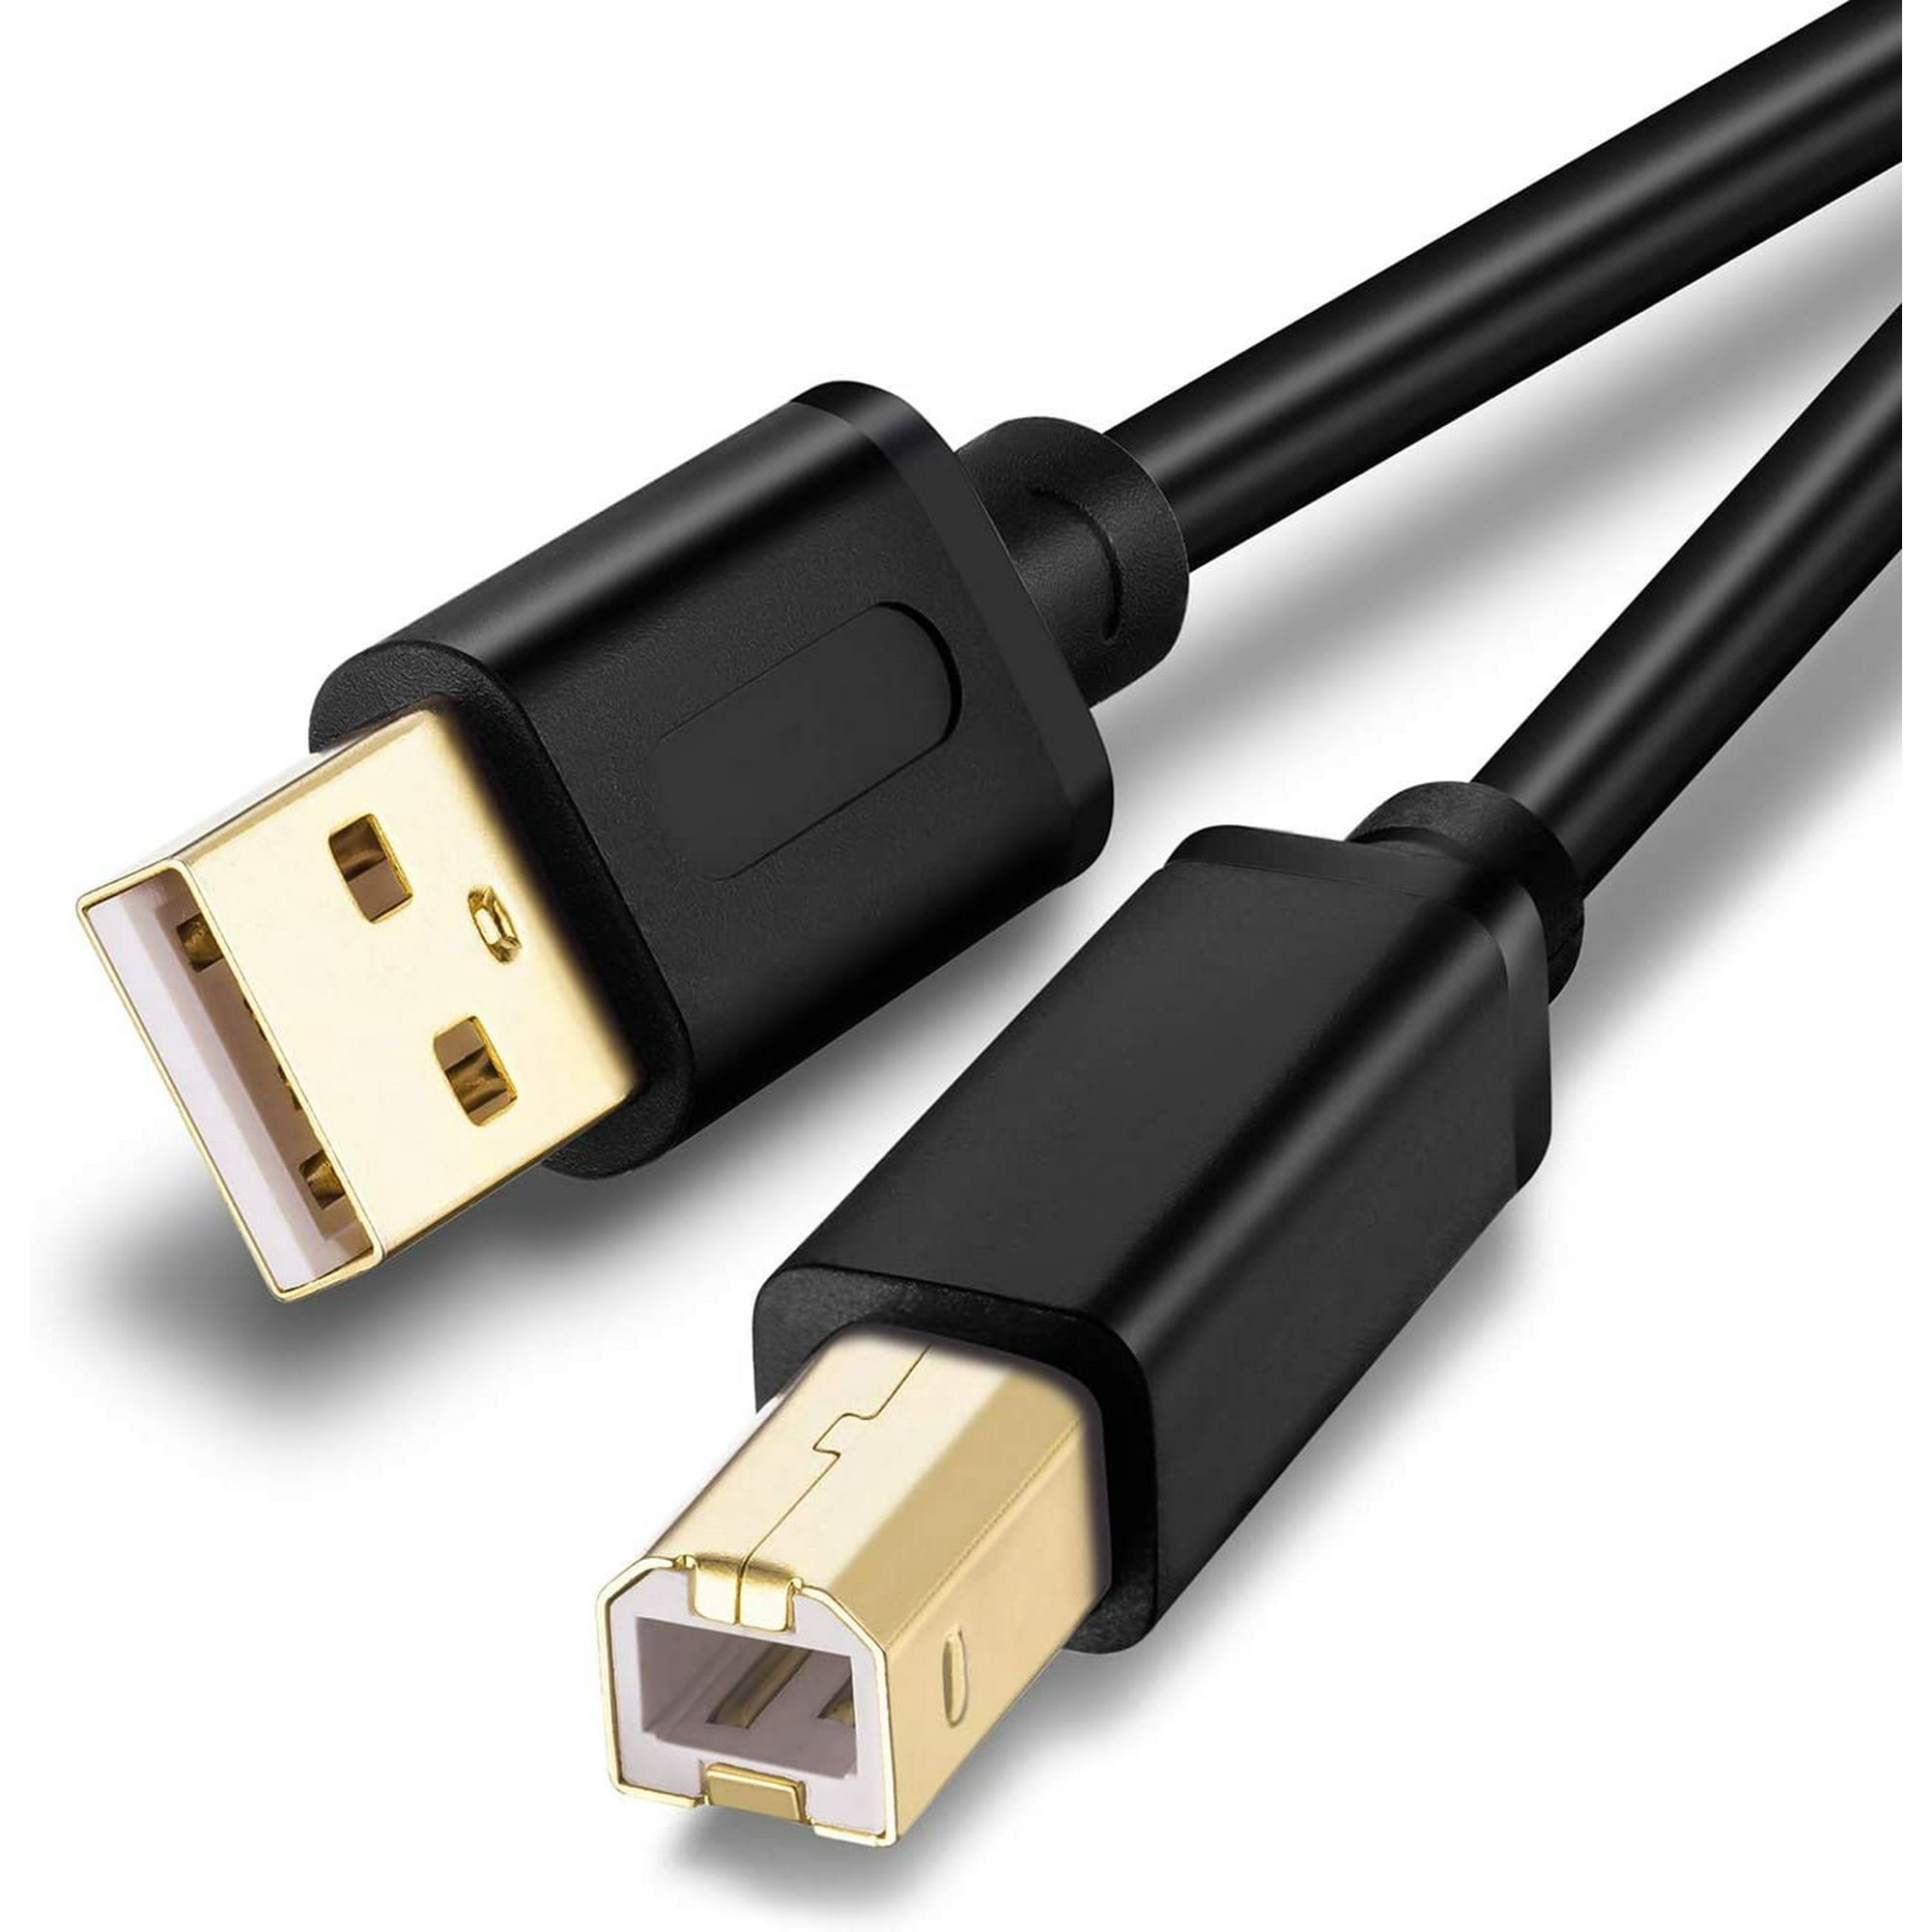 Printer Cable 20Ft,Black Color USB Printer Cable USB 2.0 Type A Male to B Male Scanner Cord High Speed for HP, | Walmart Canada